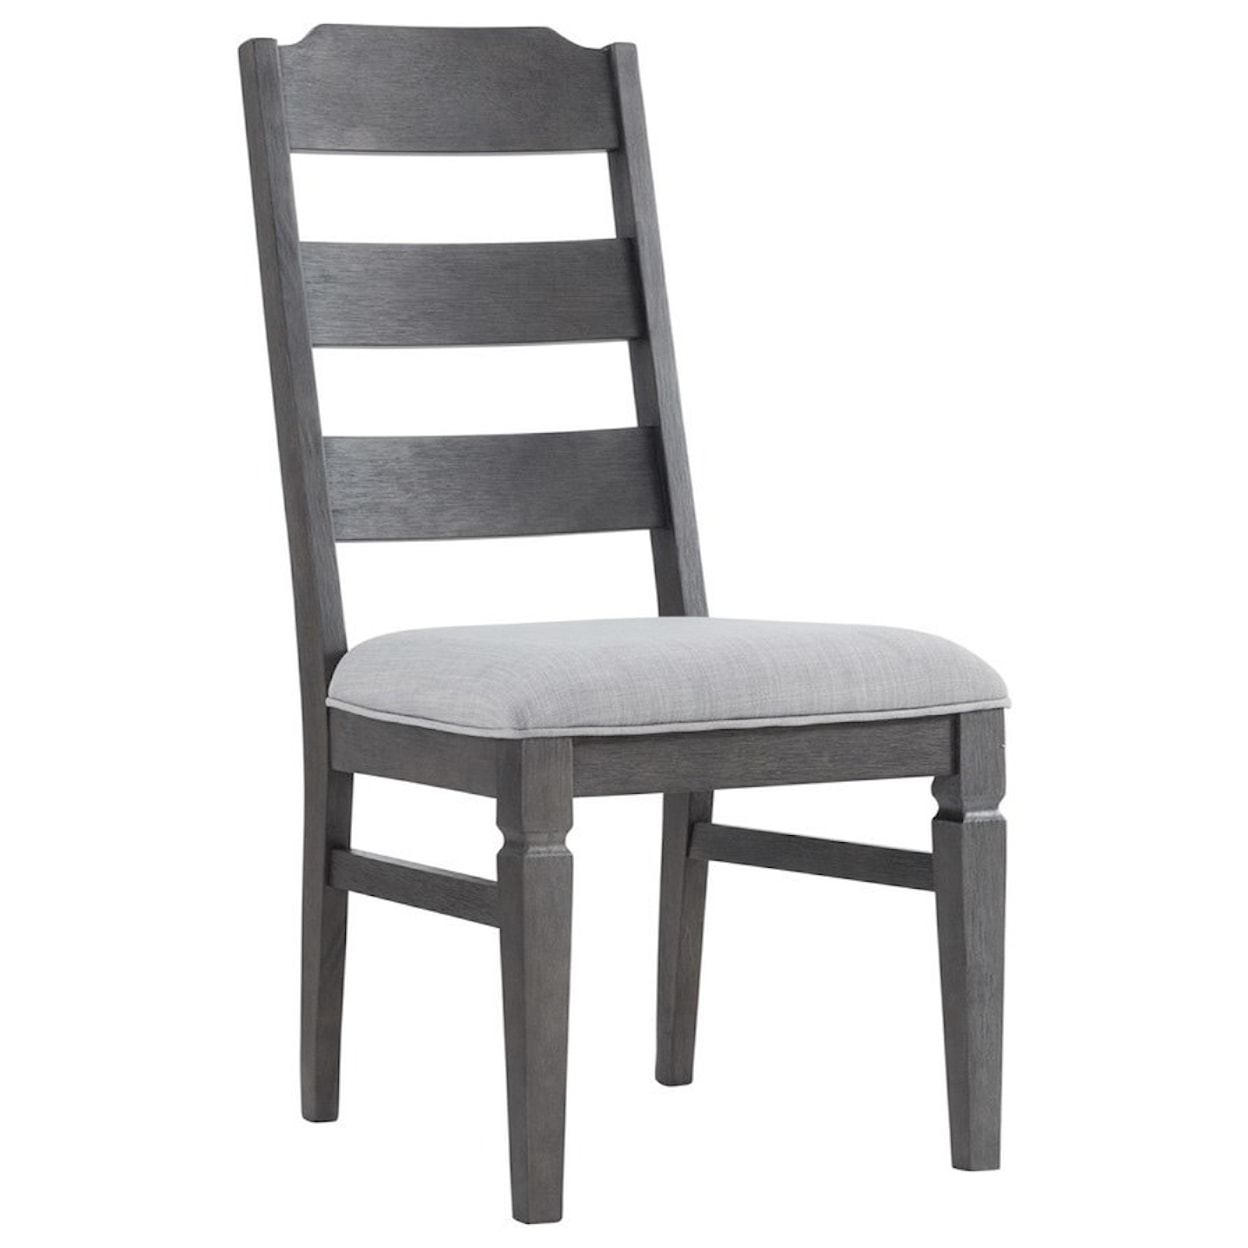 Intercon Foundry 7-Piece Table and Chair Set